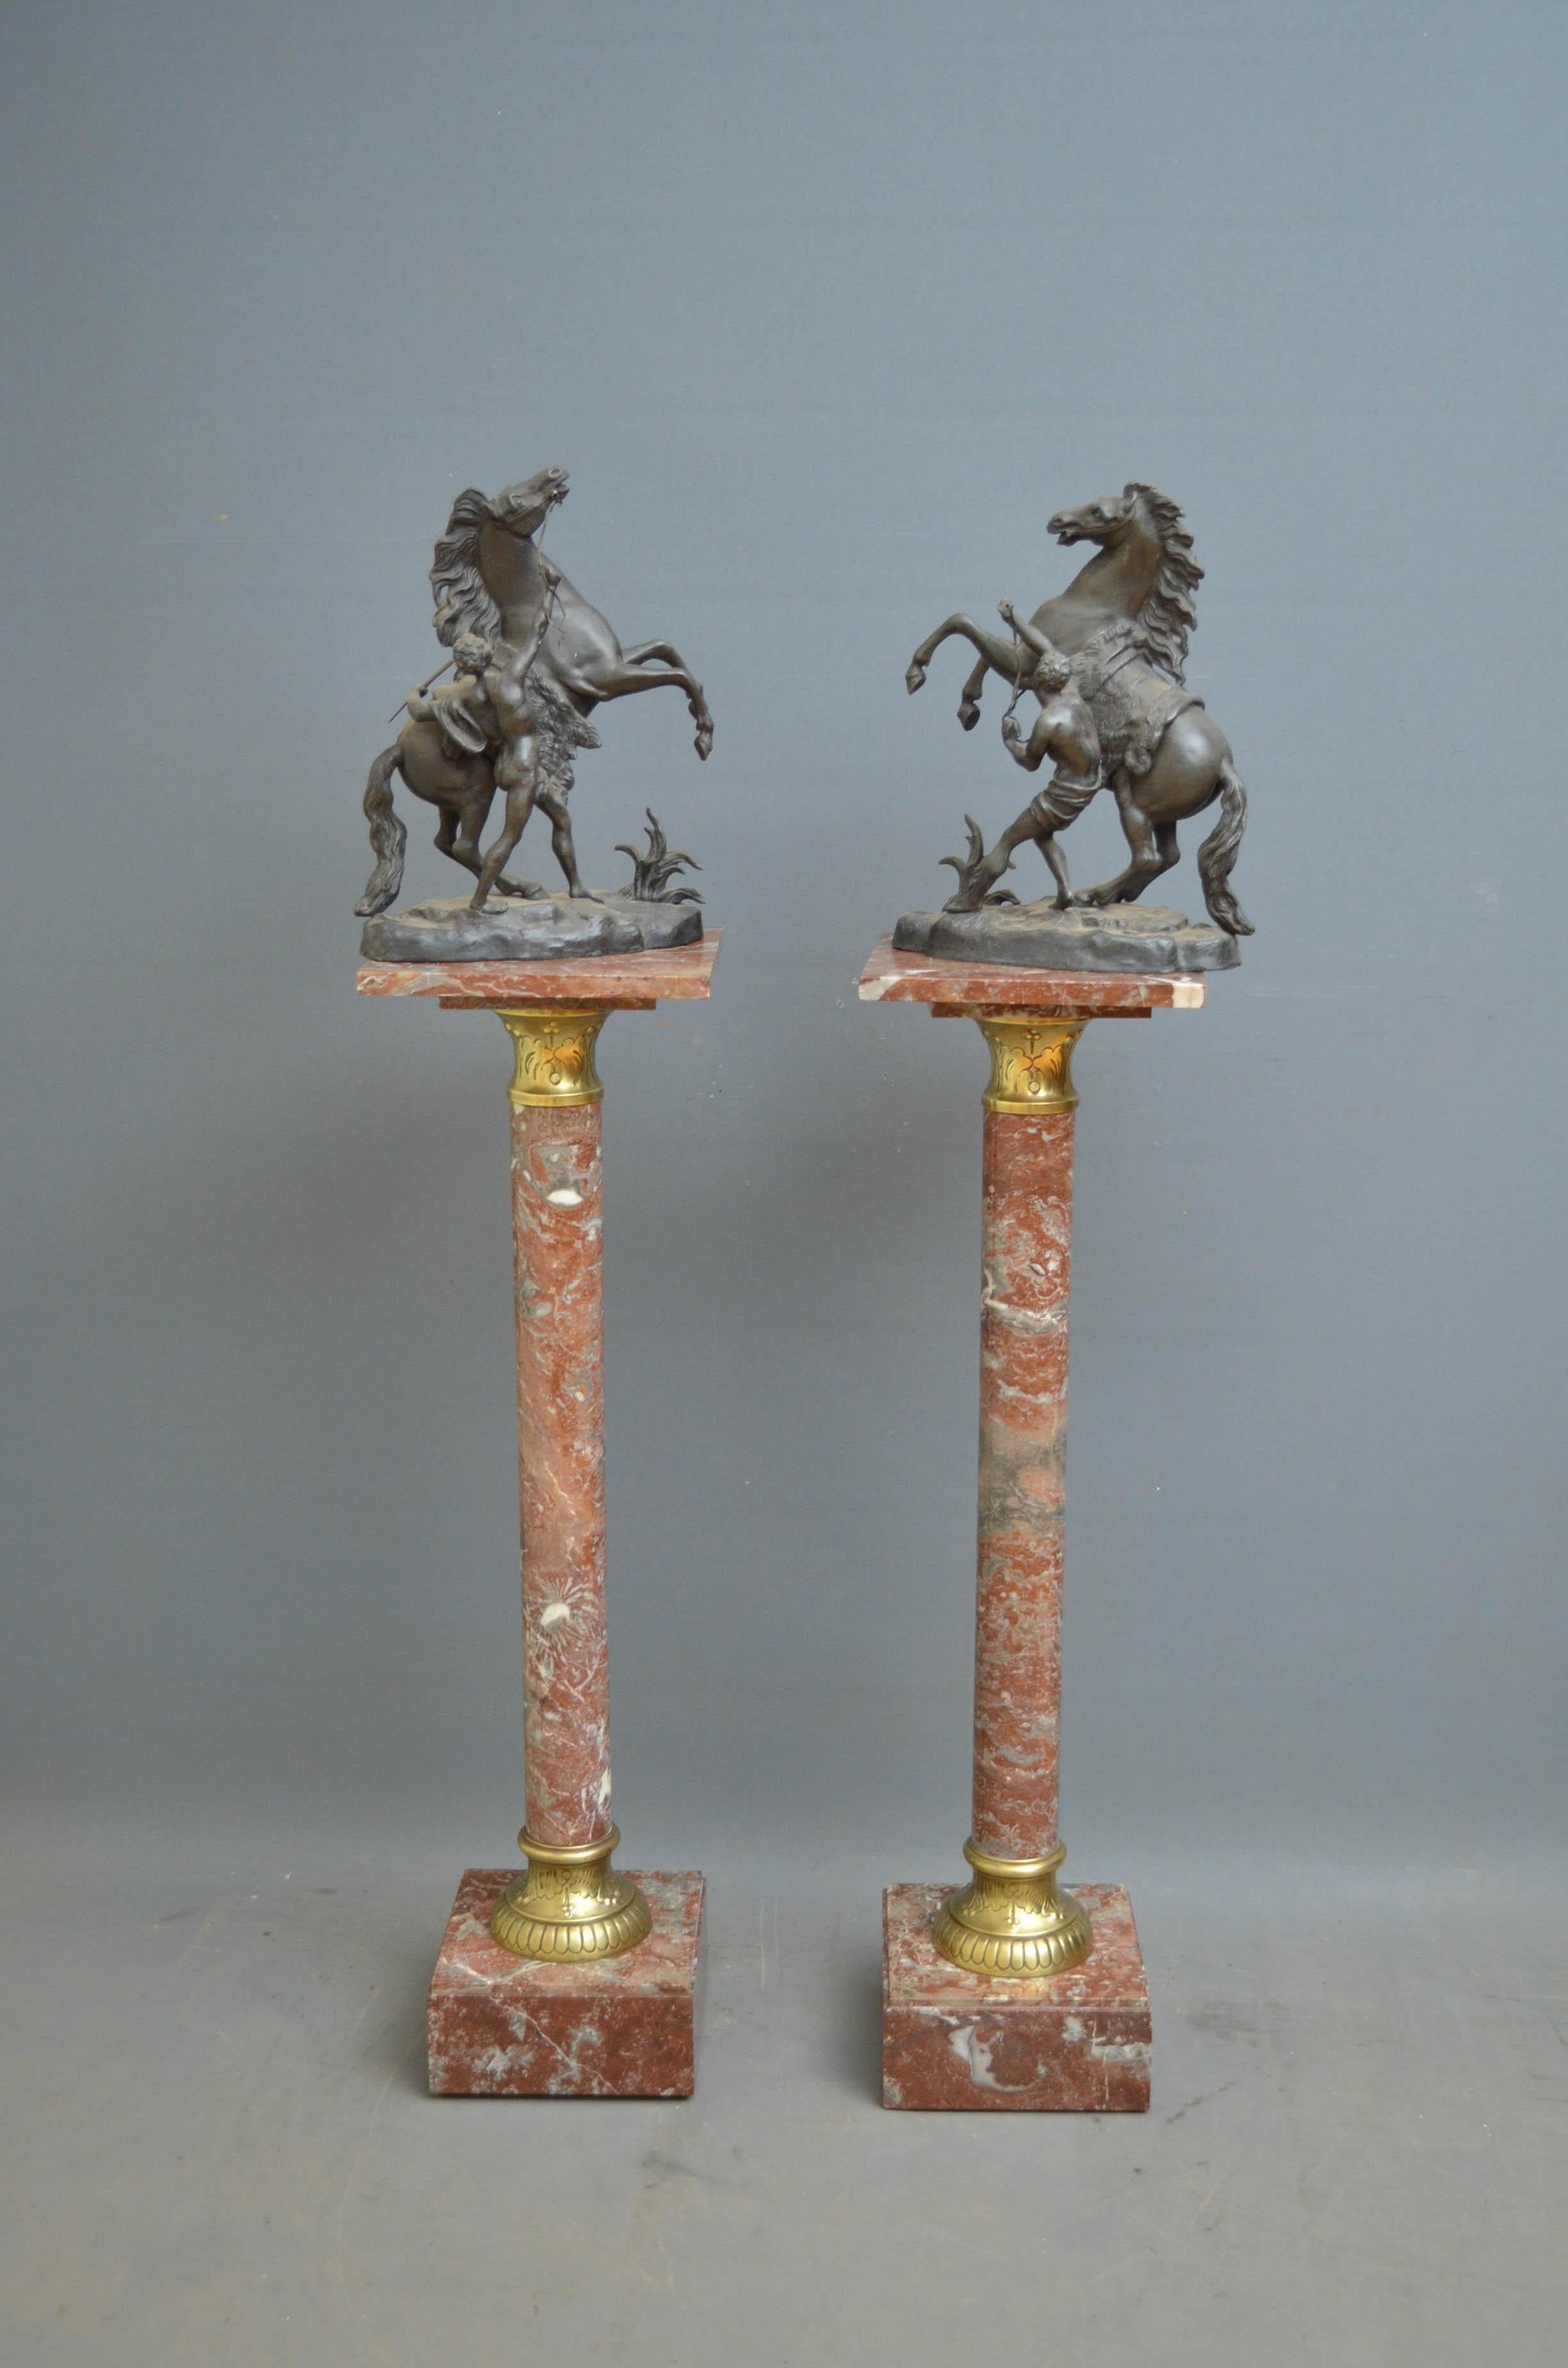 K0370 Excellent pair of 19th century rouge, marble columns with brass collars. All in home ready condition, circa 1880
Measures: H 40.5” x W 11” x D 11”
H 103 cm x W 28 cm x D 28 cm.